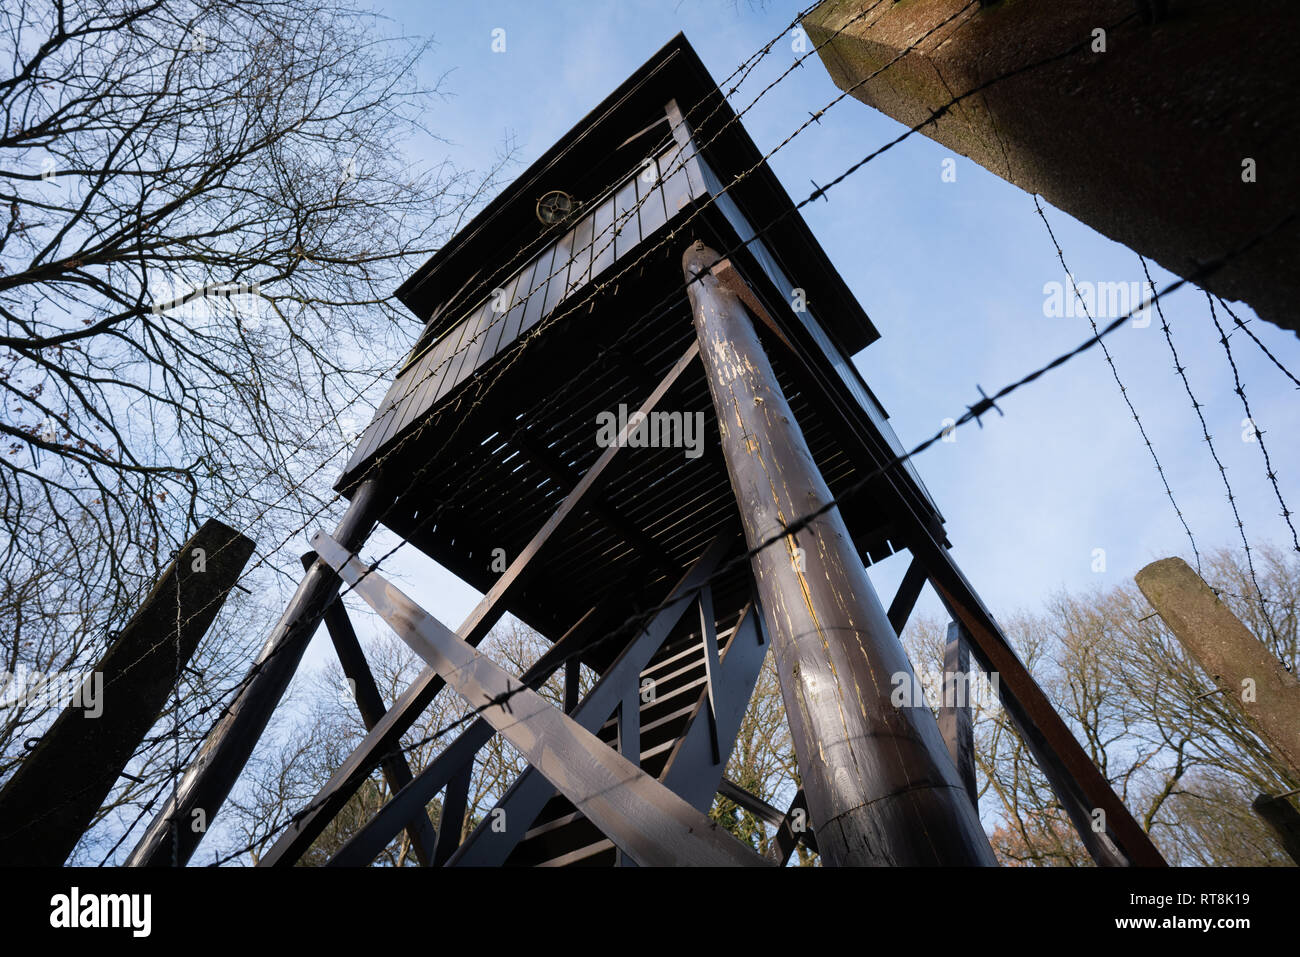 Formal Second World War Concentration camp Amersfoort, the Netherlands Stock Photo